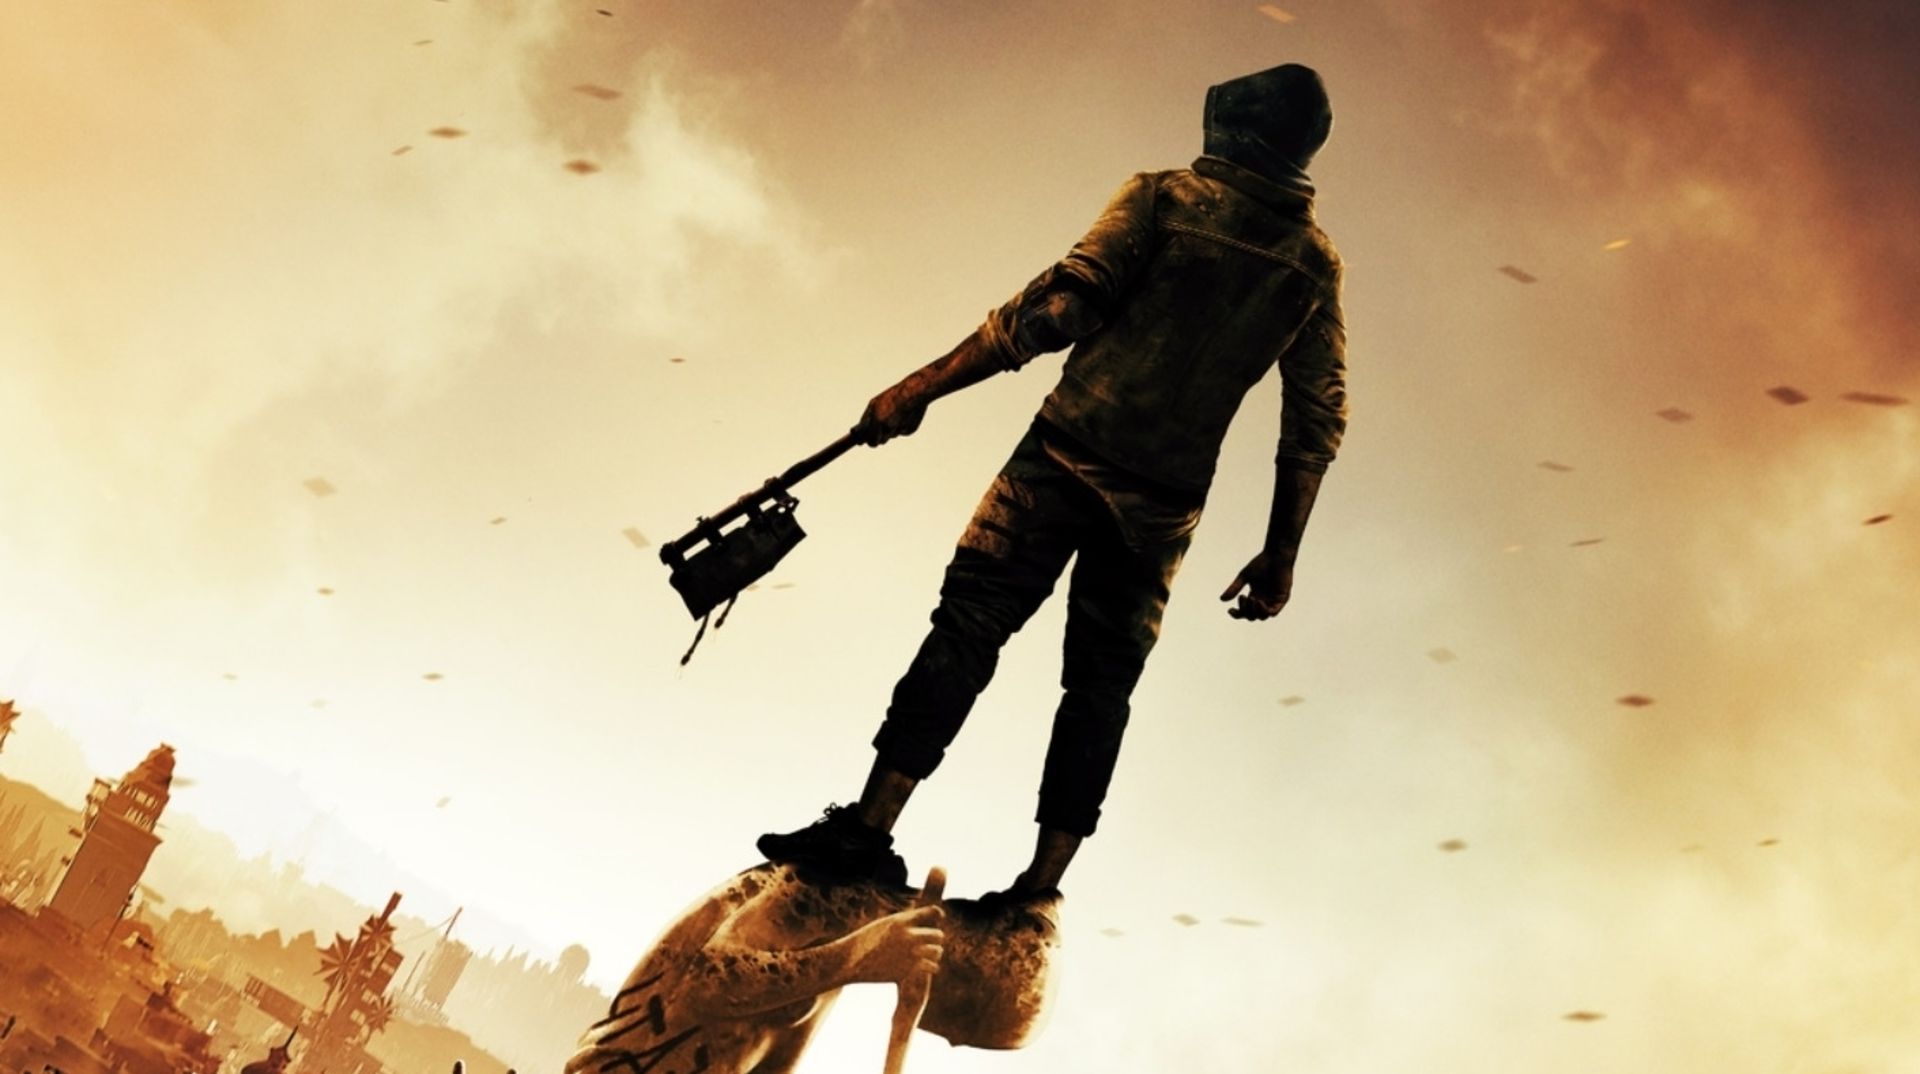 Dying Light 2 will NOT have Nintendo Switch or Cross-Play support